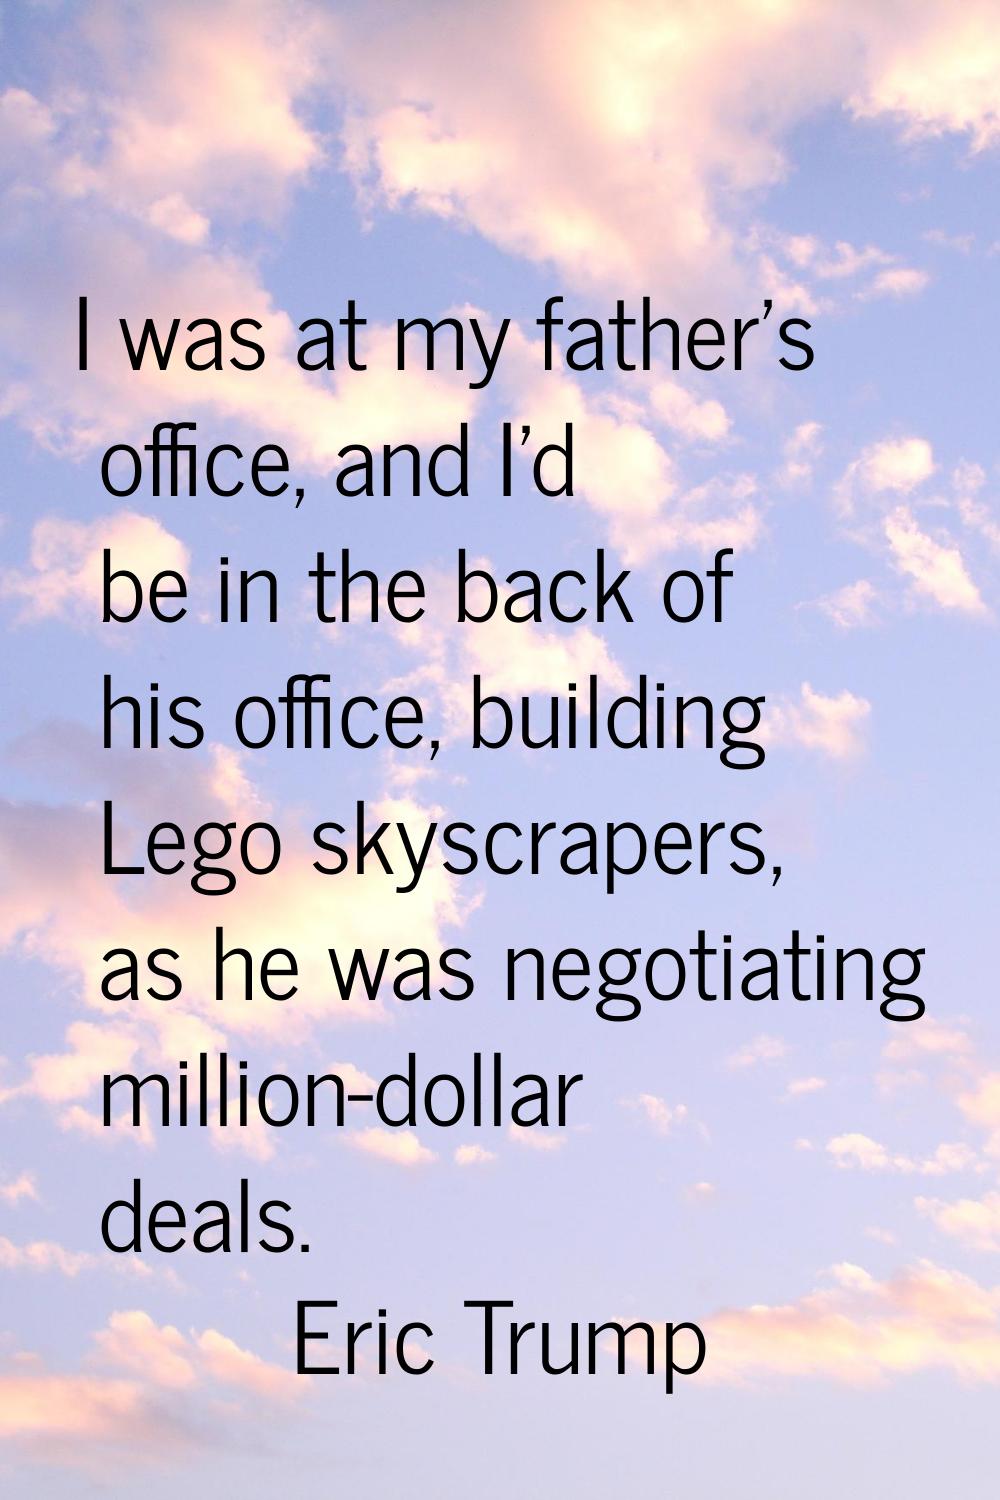 I was at my father's office, and I'd be in the back of his office, building Lego skyscrapers, as he